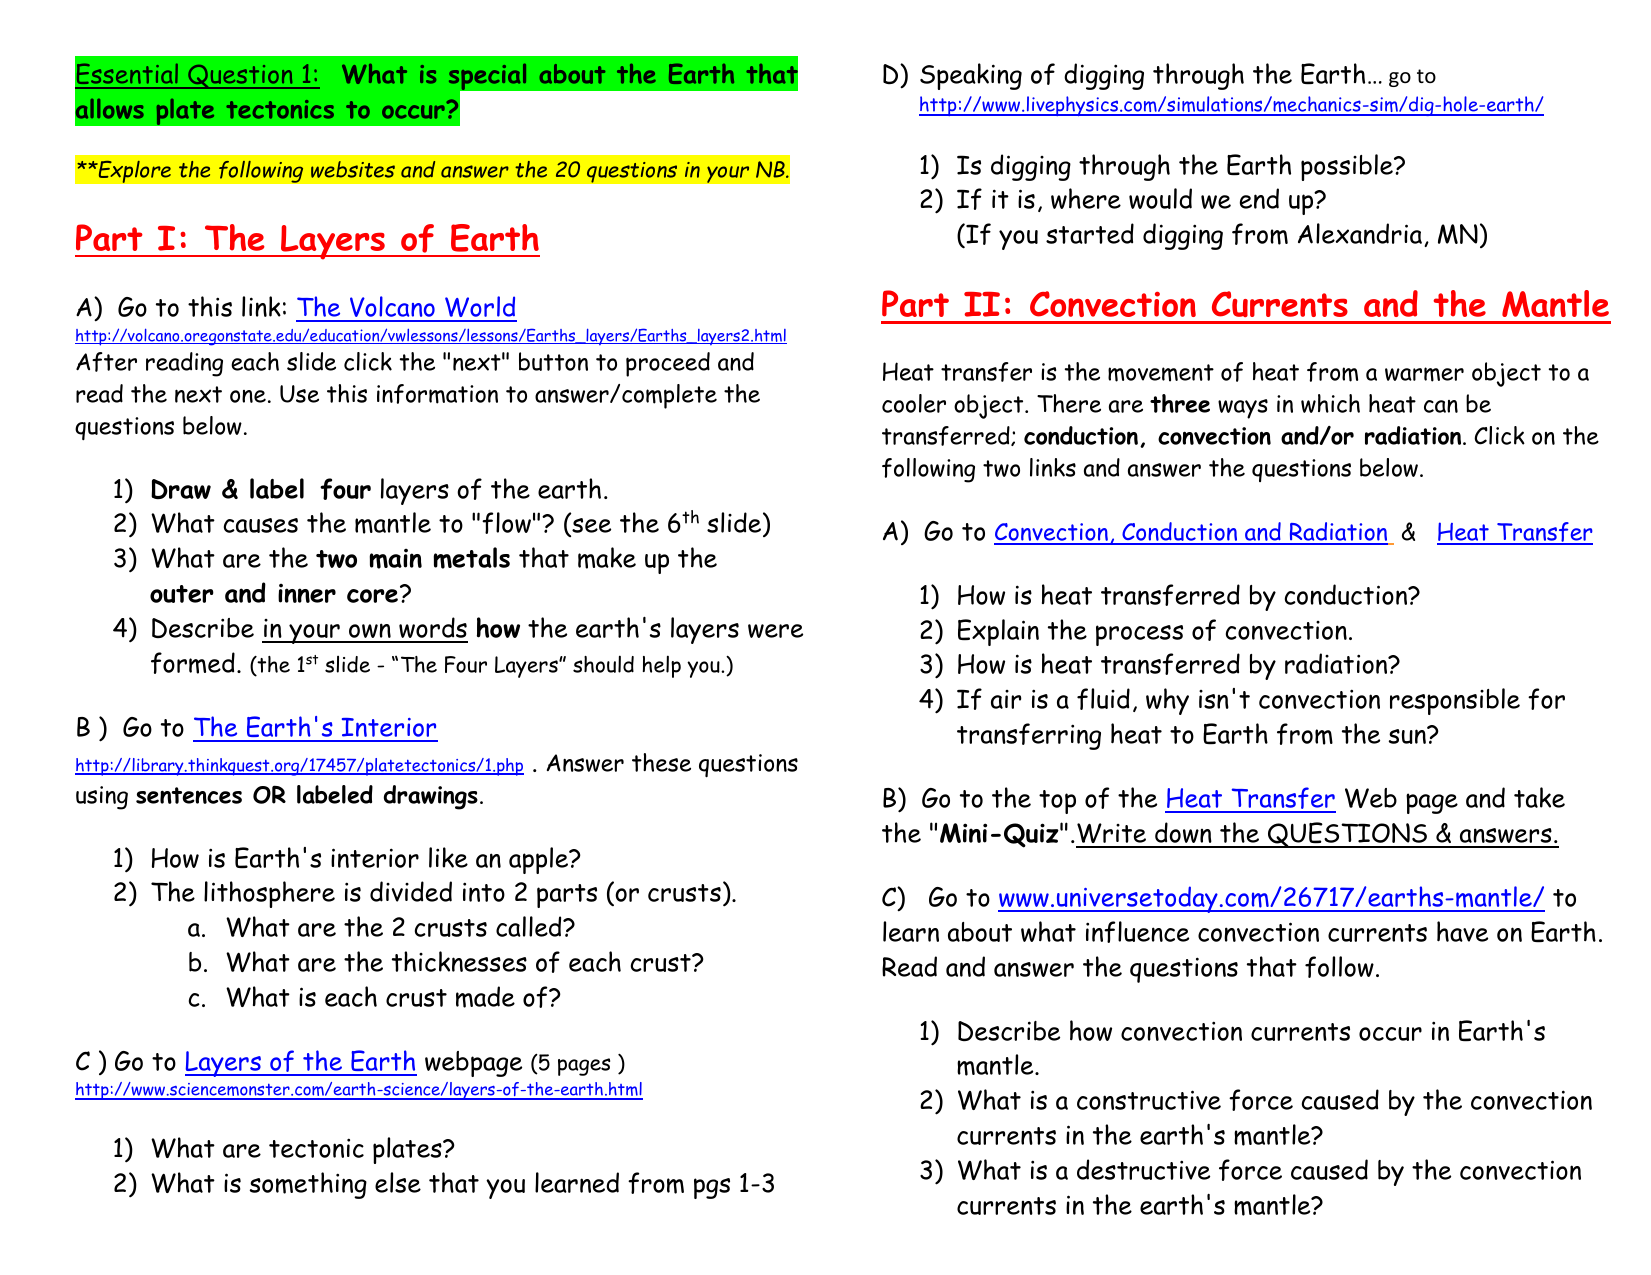 Part 1 The Layers Of Earth